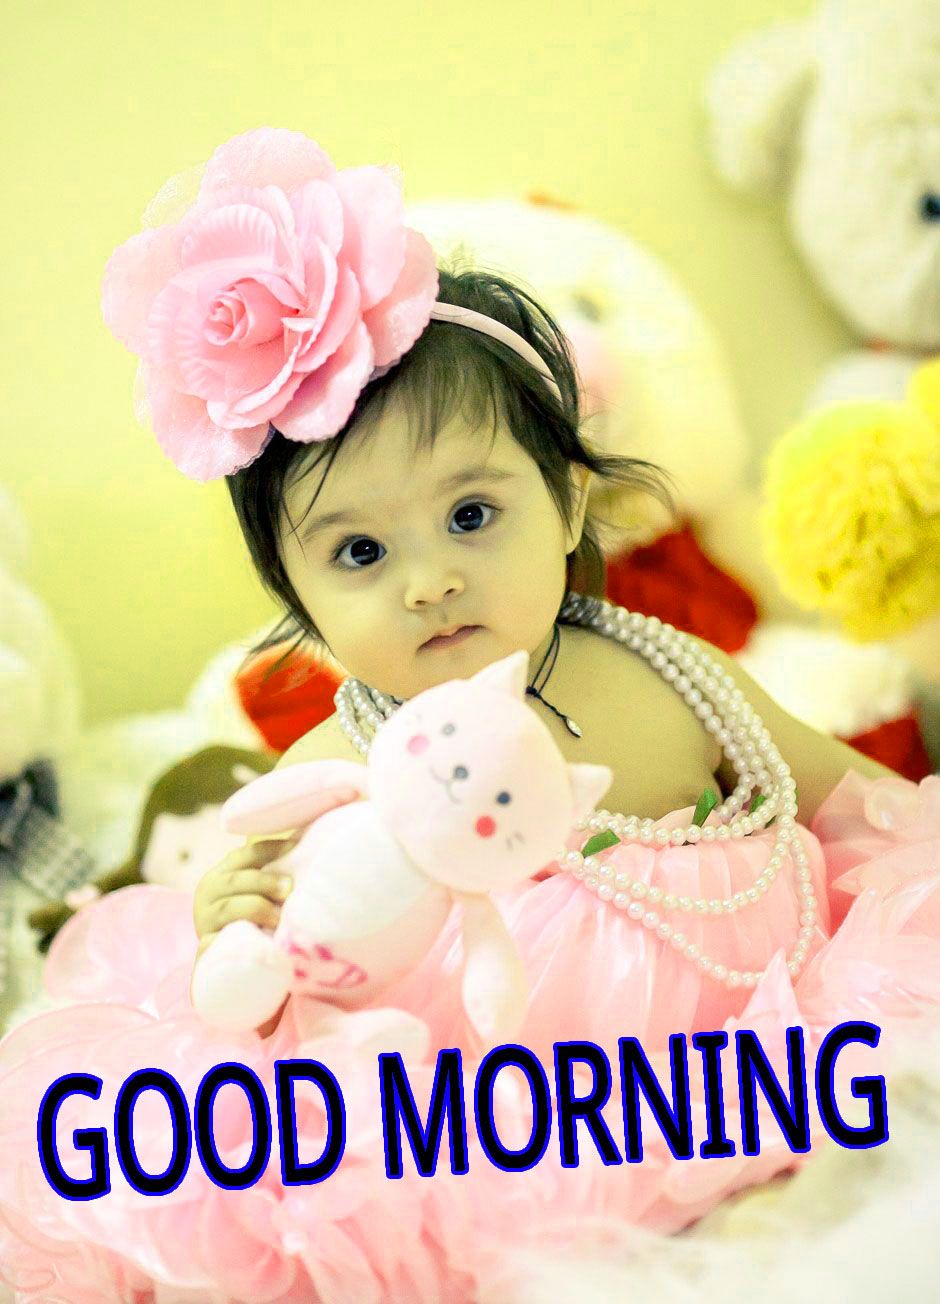 Good Morning Baby Wallpapers - Wallpaper Cave